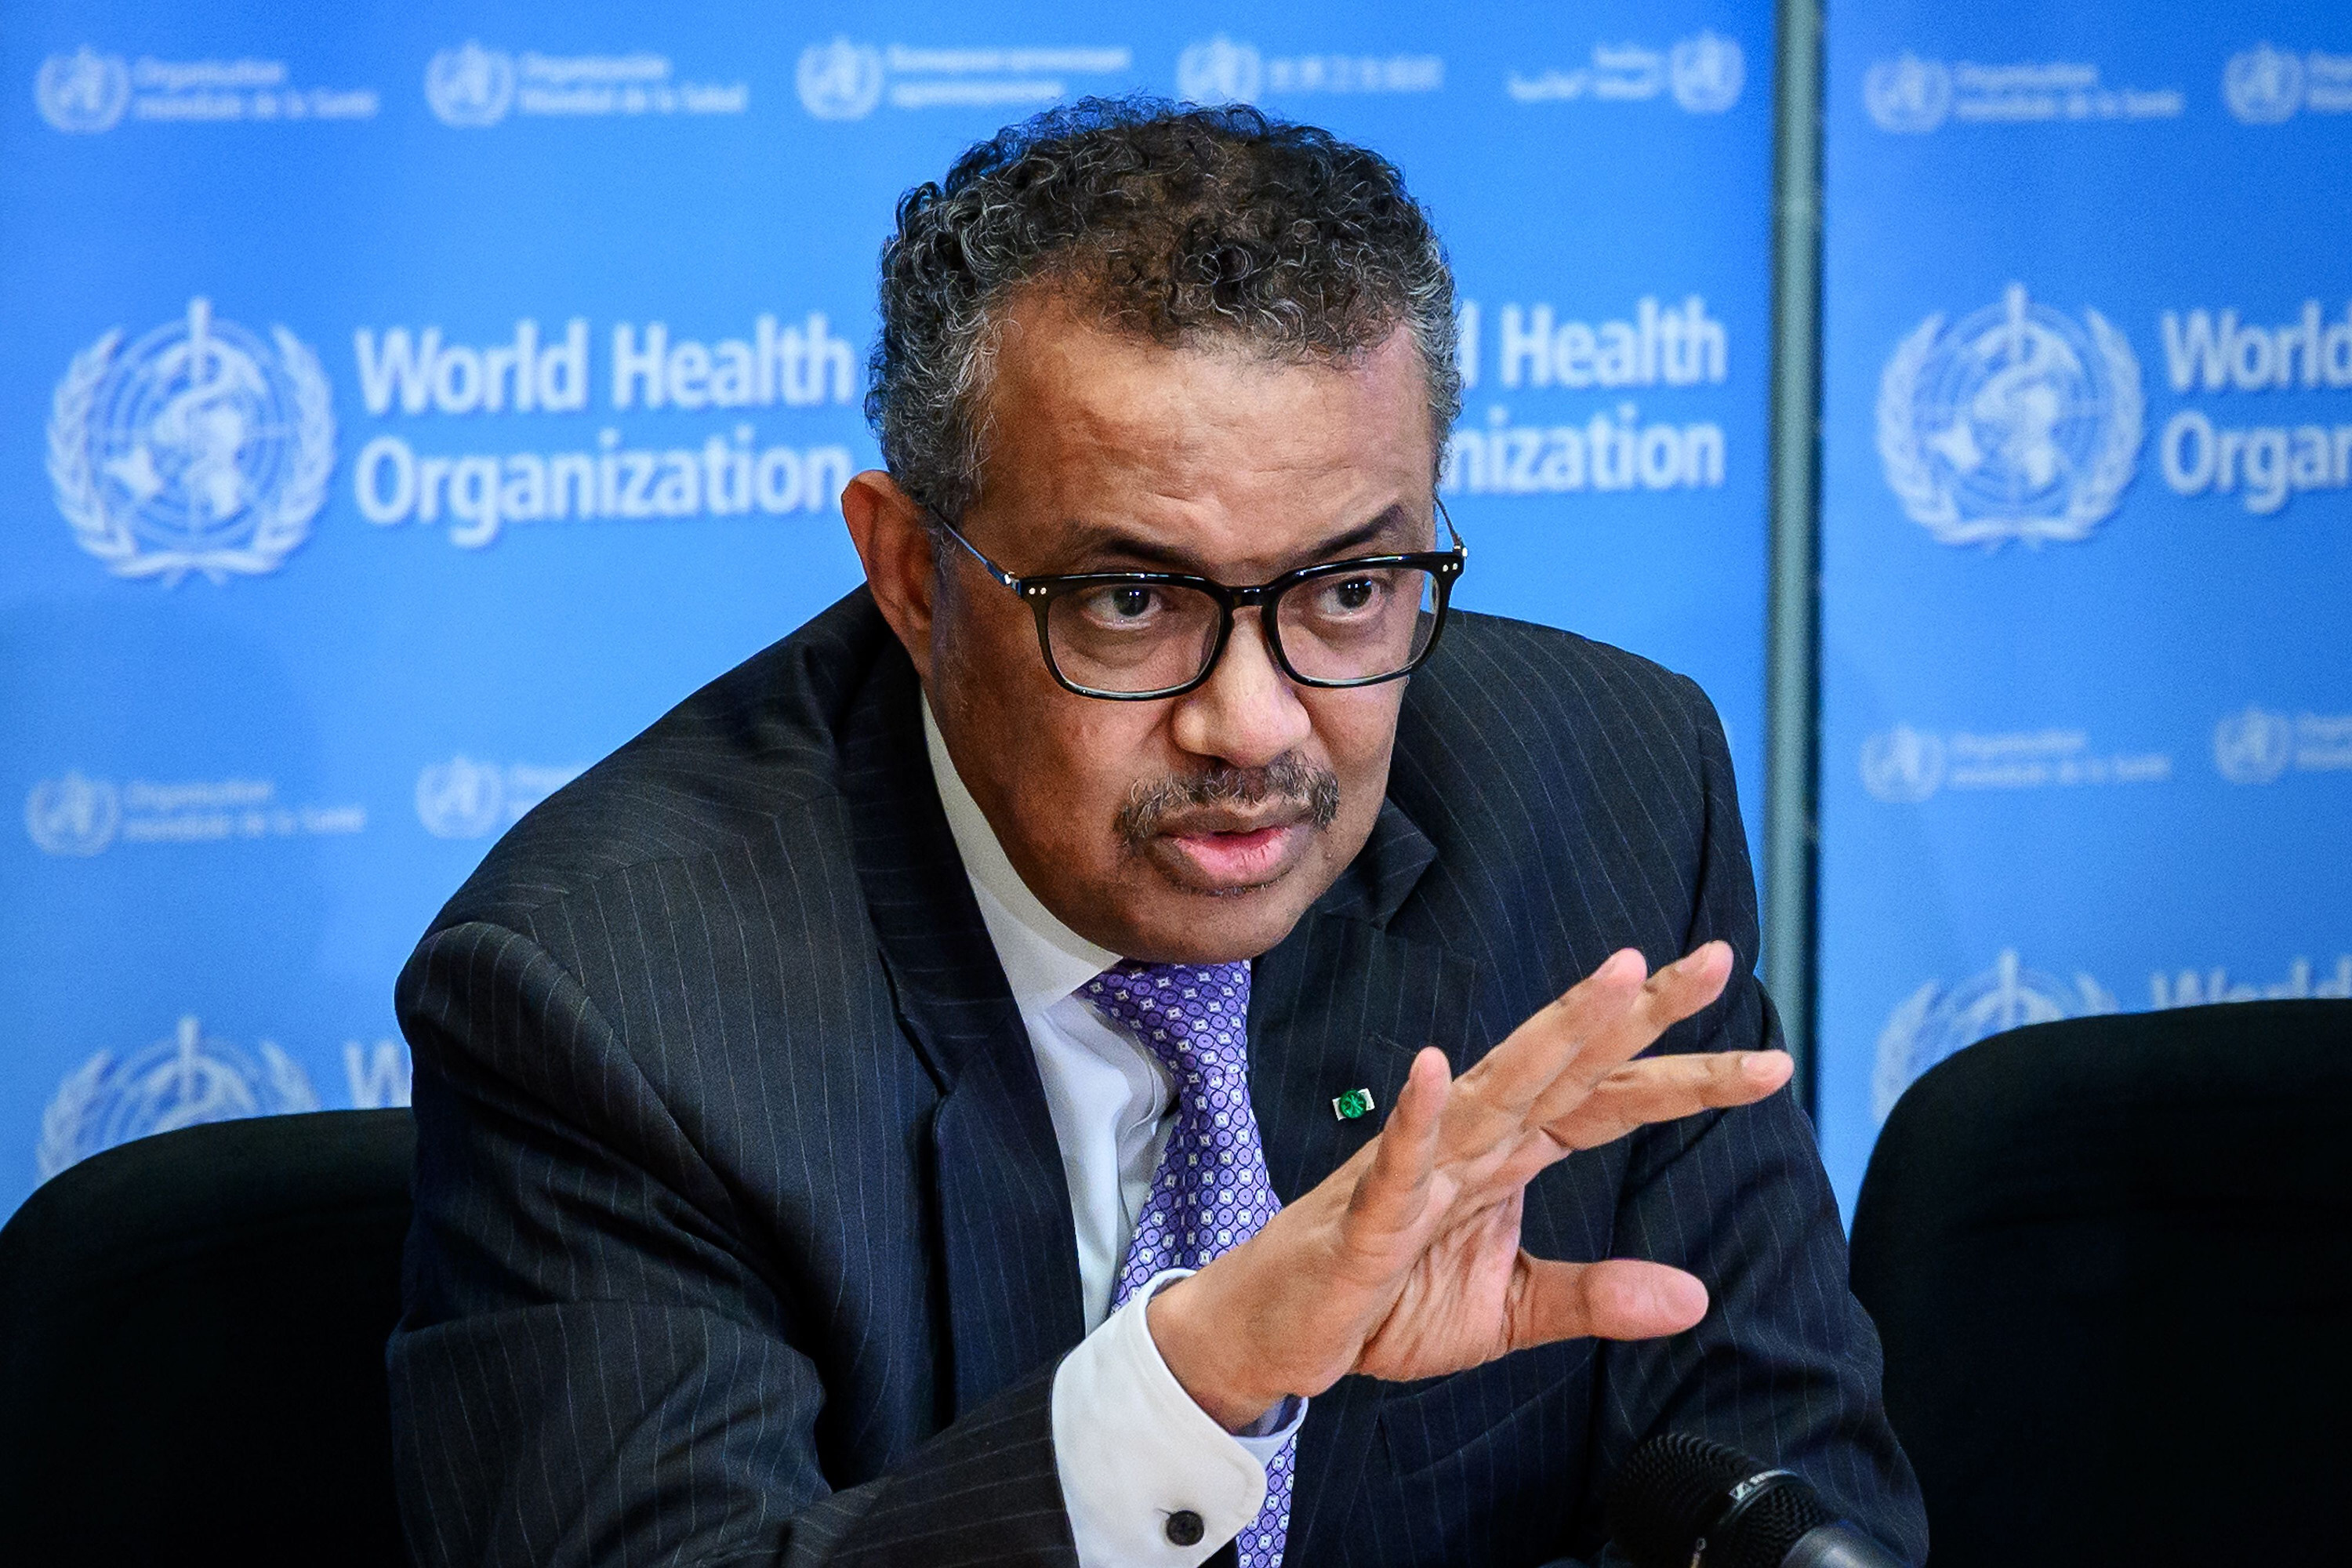 WHO chief Tedros Adhanom Ghebreyesus says there is still a long road ahead but the decision shows common ground can be found. Photo: TNS